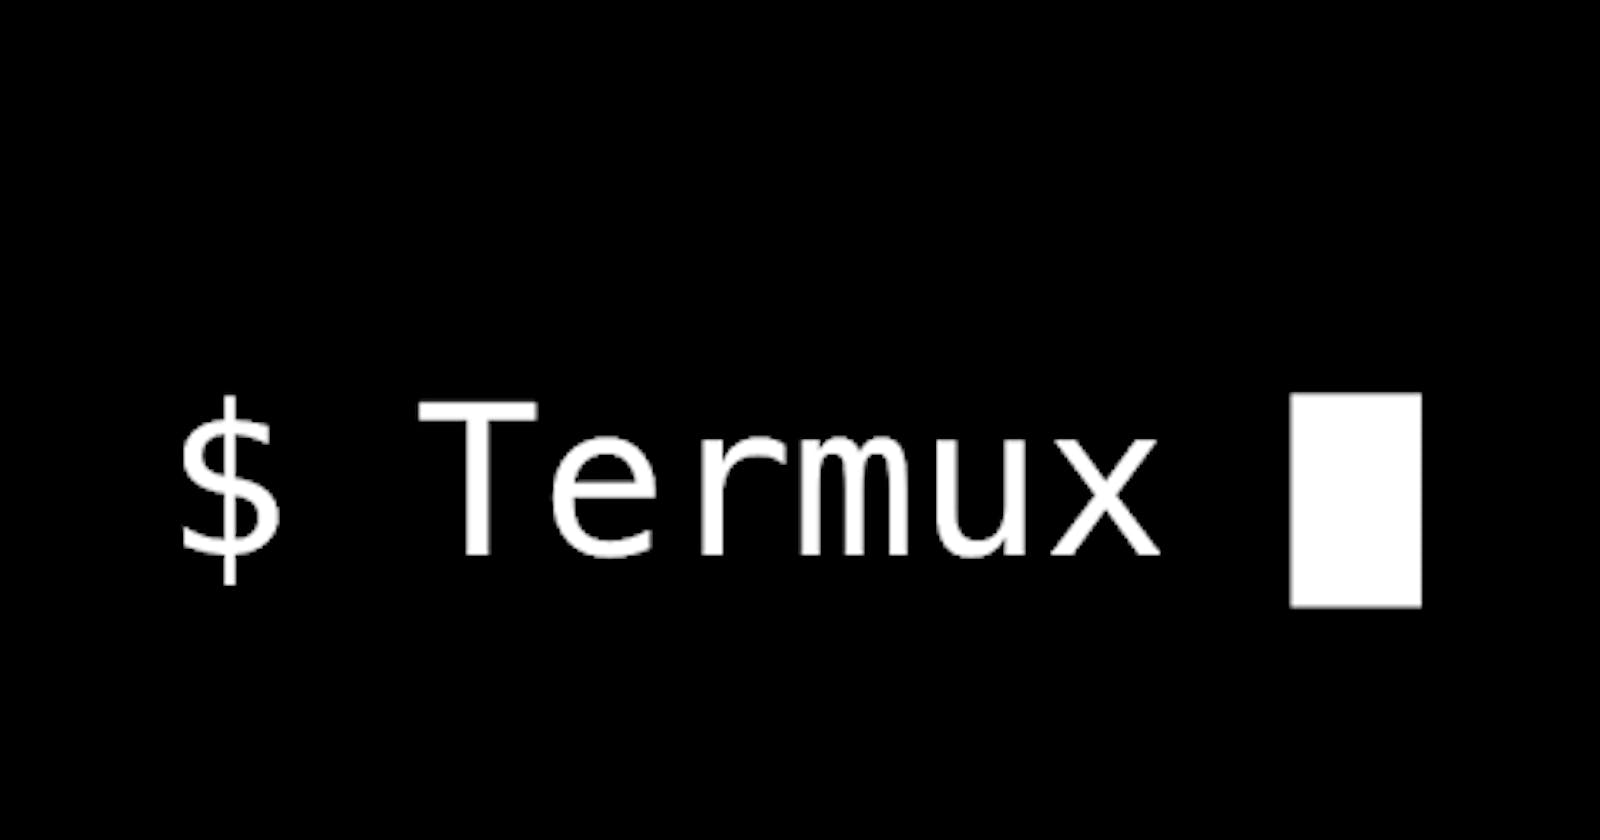 About Termux